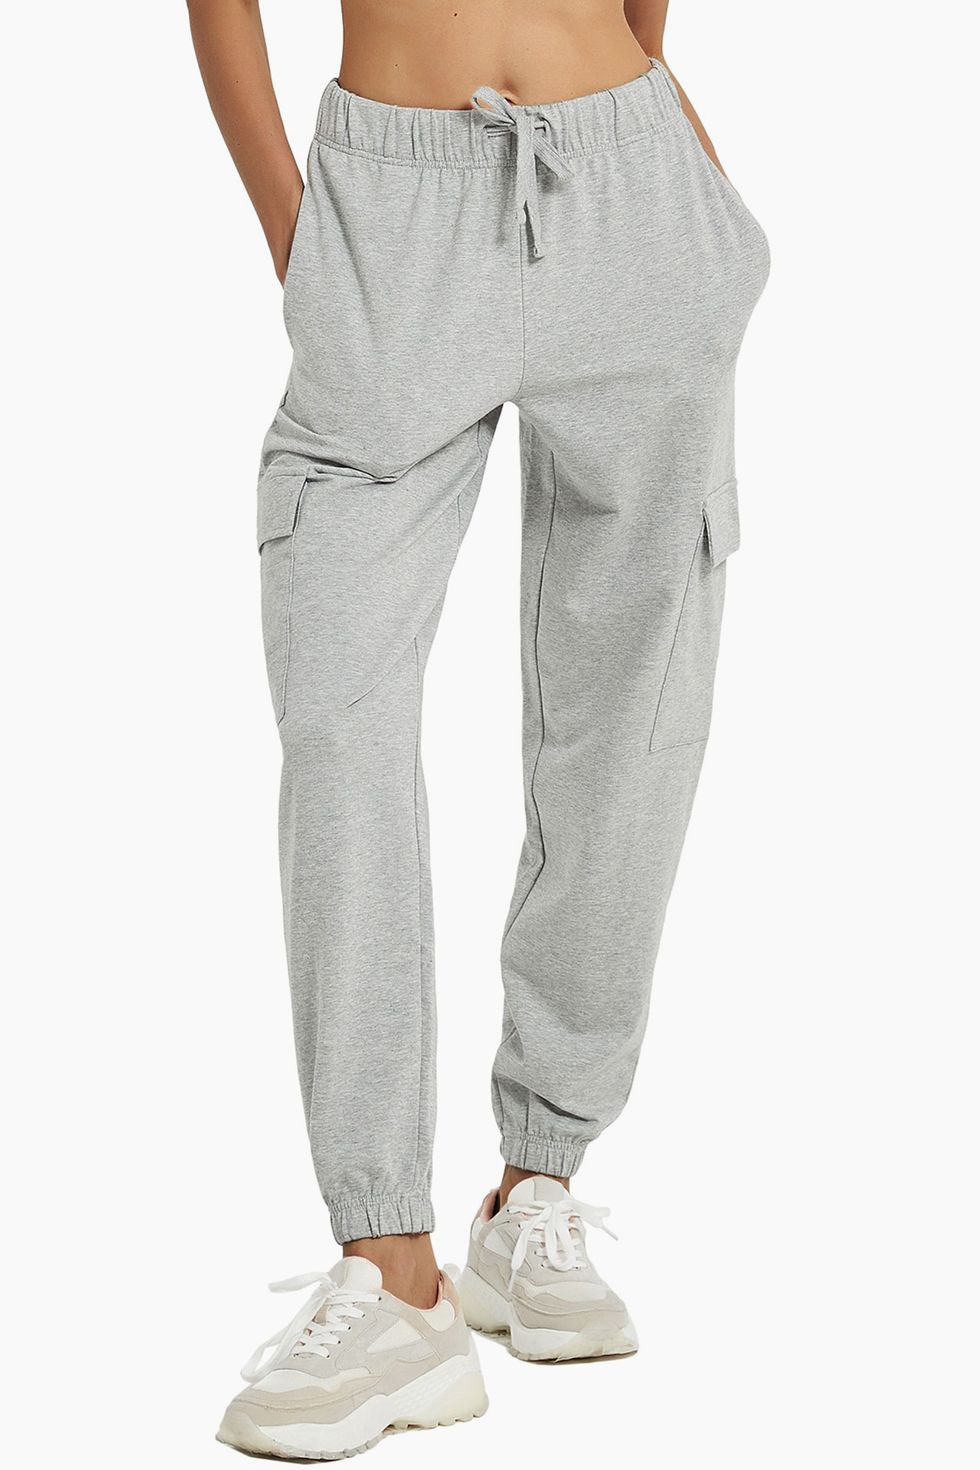 PULI Capri Sweatpants for Women Joggers Cropped with Pockets Sweat